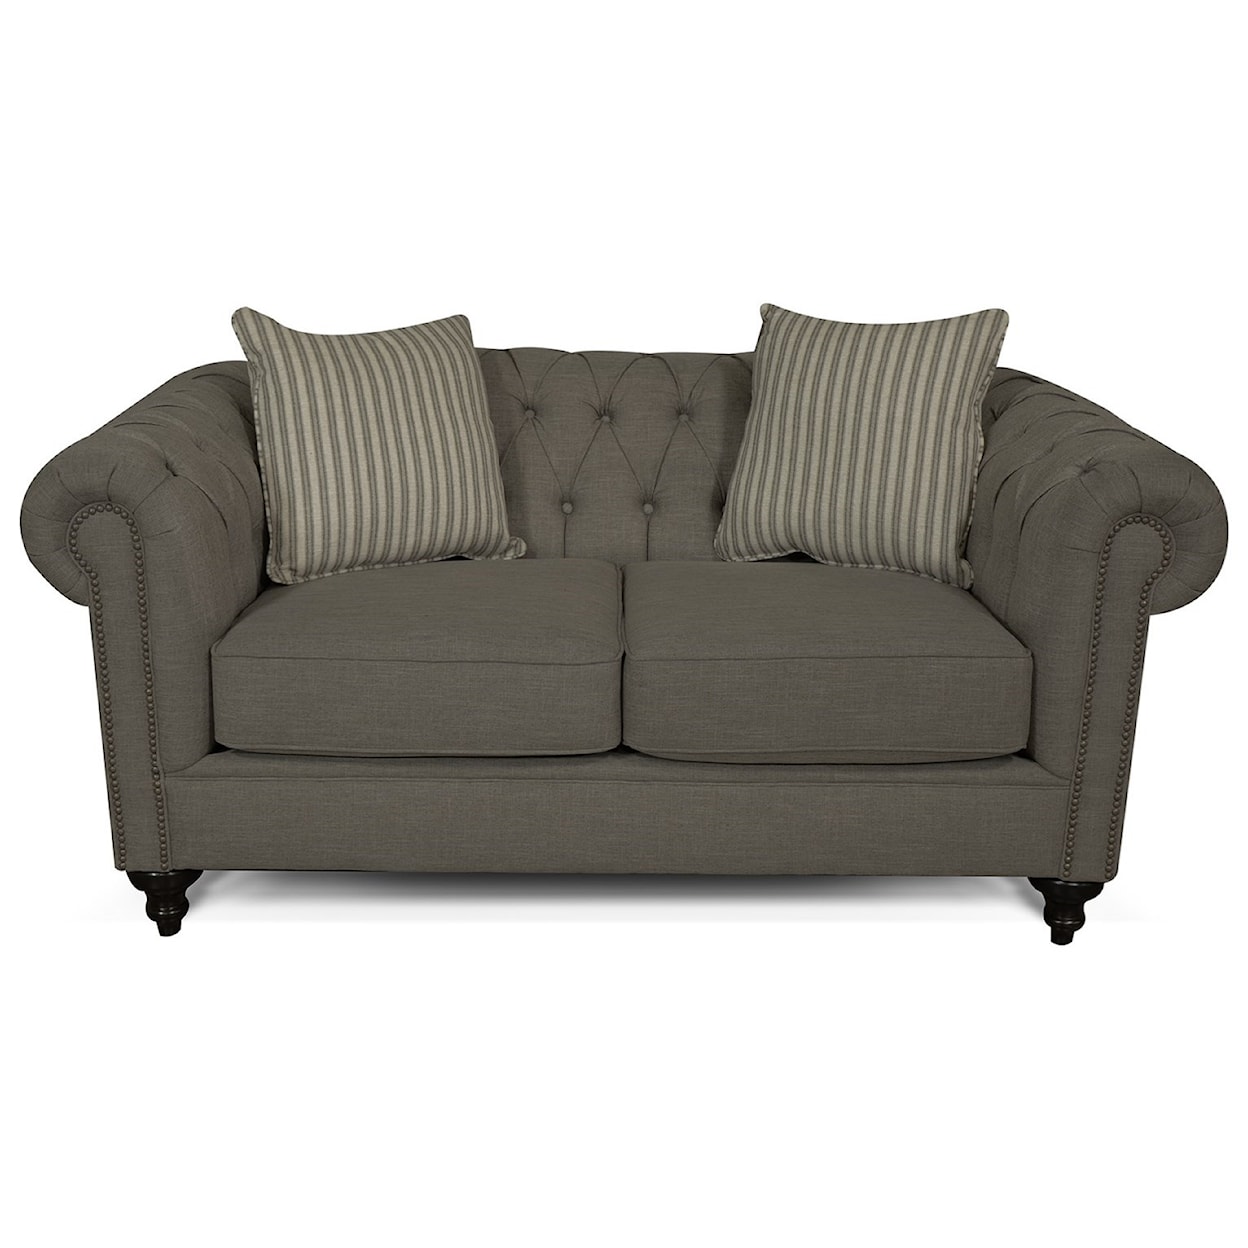 England Ruby 4H00 Loveseat with Button Tufted Back